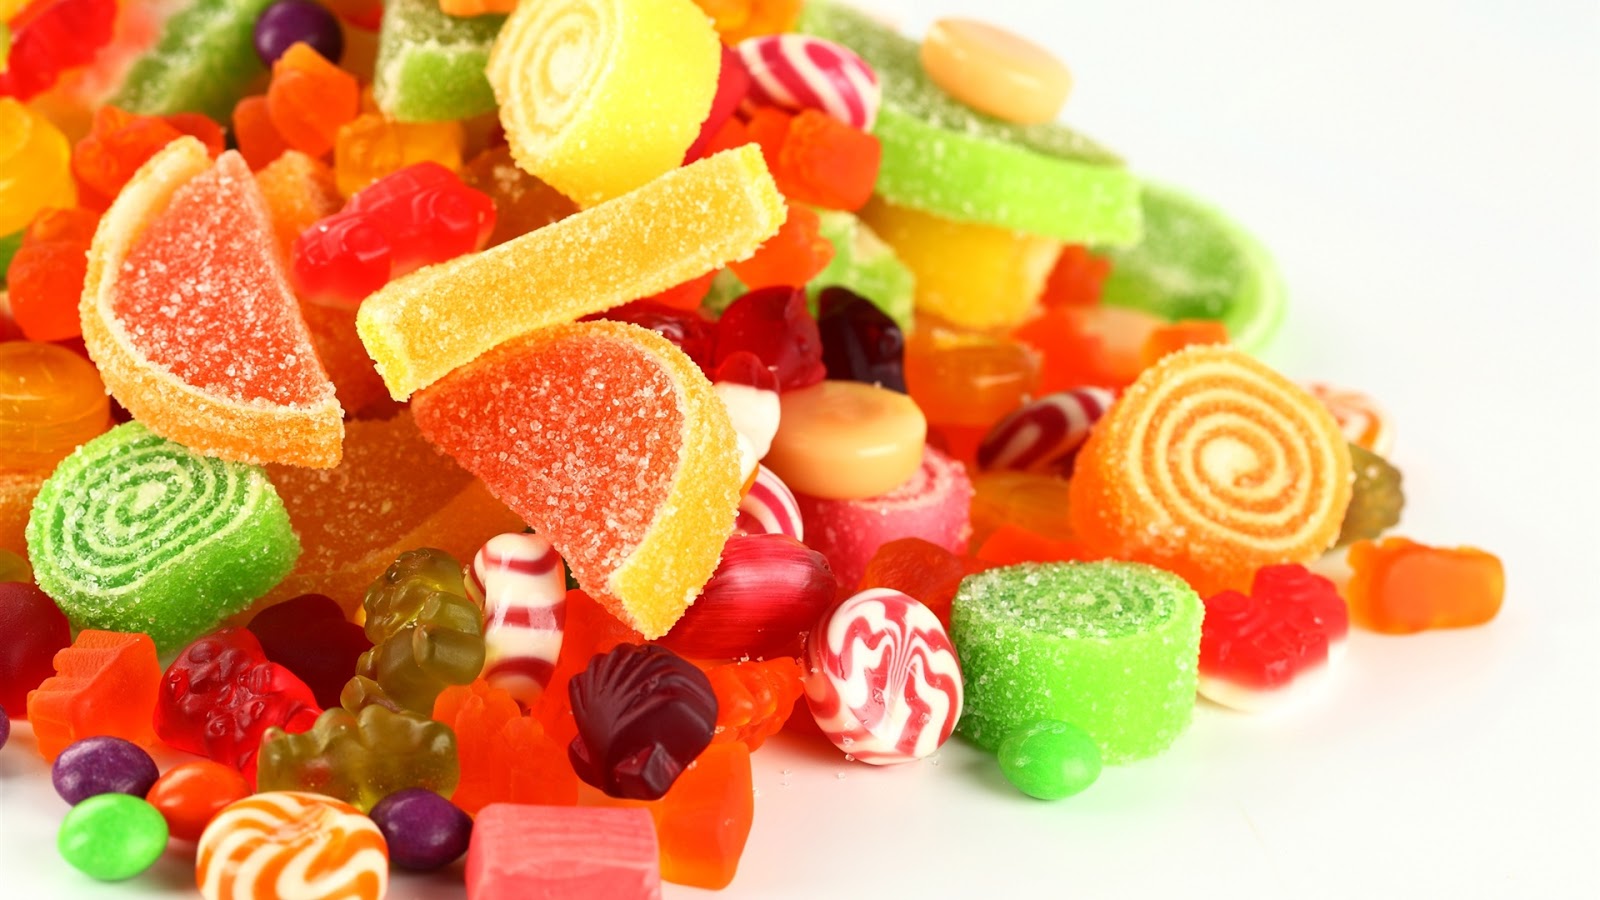 Computer Candy Wallpapers, Desktop Backgrounds 1000x660 Id